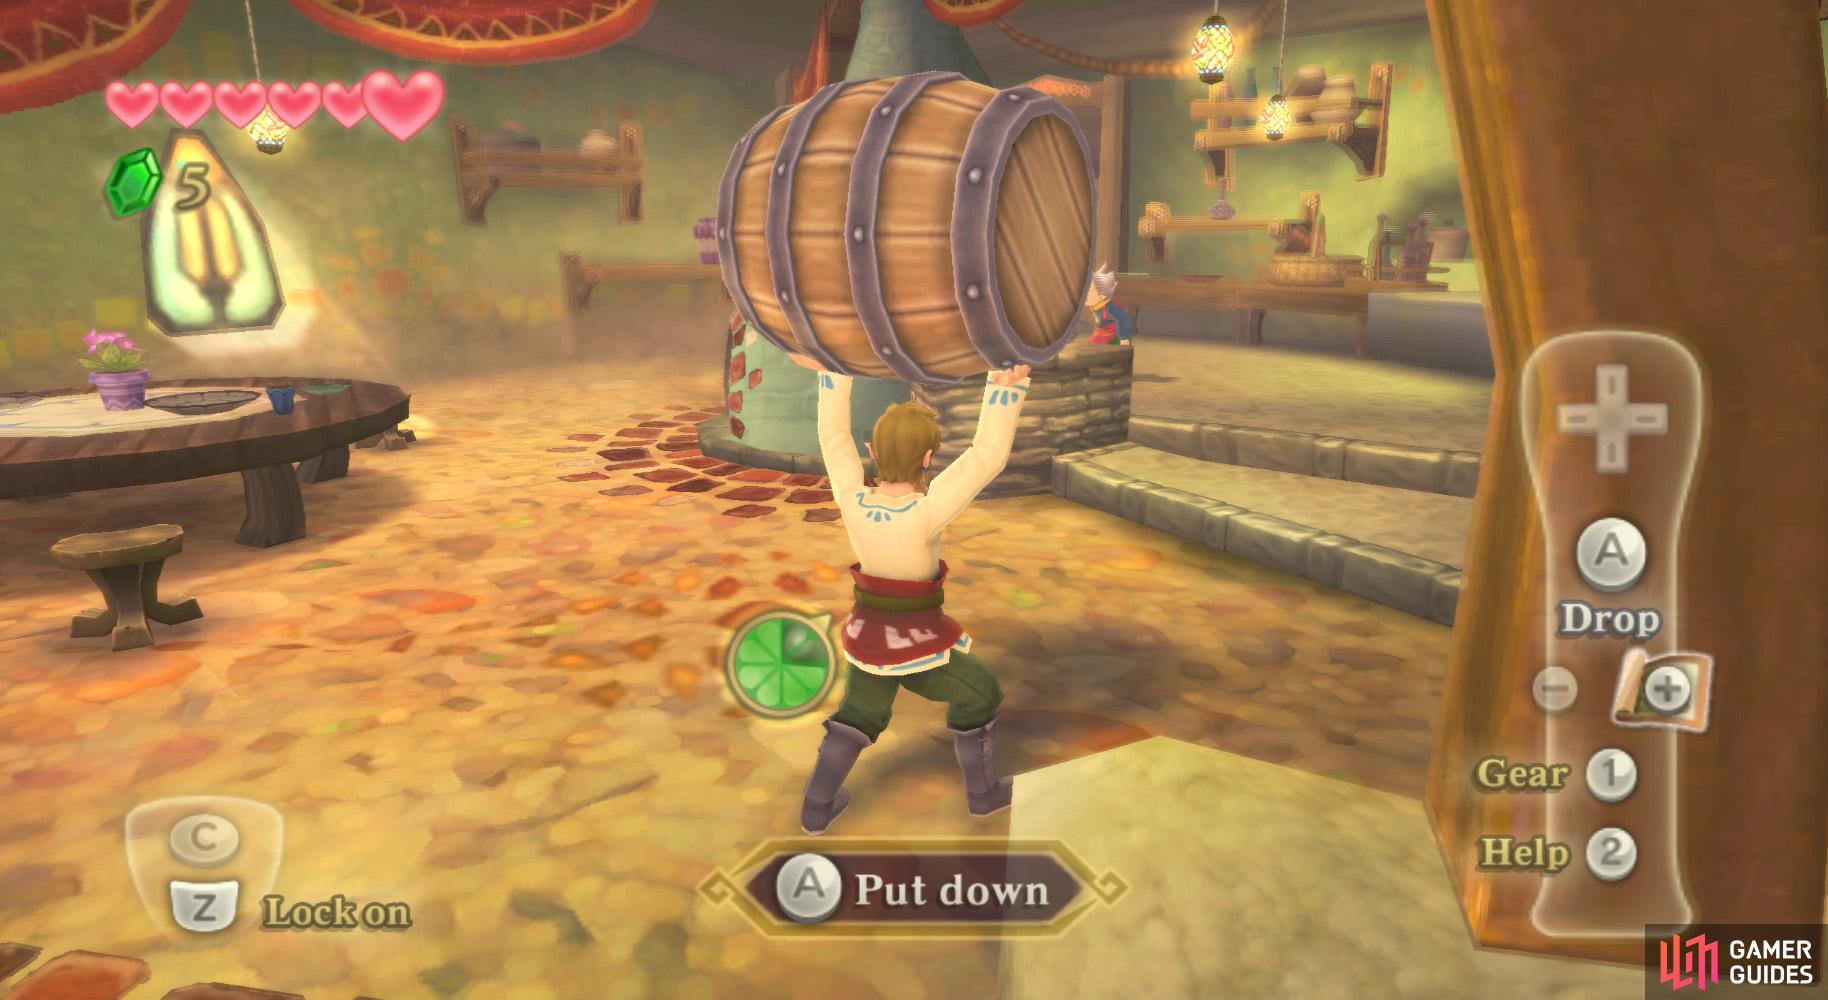 Hnngh, lifting these barrels will use up a lot of stamina.